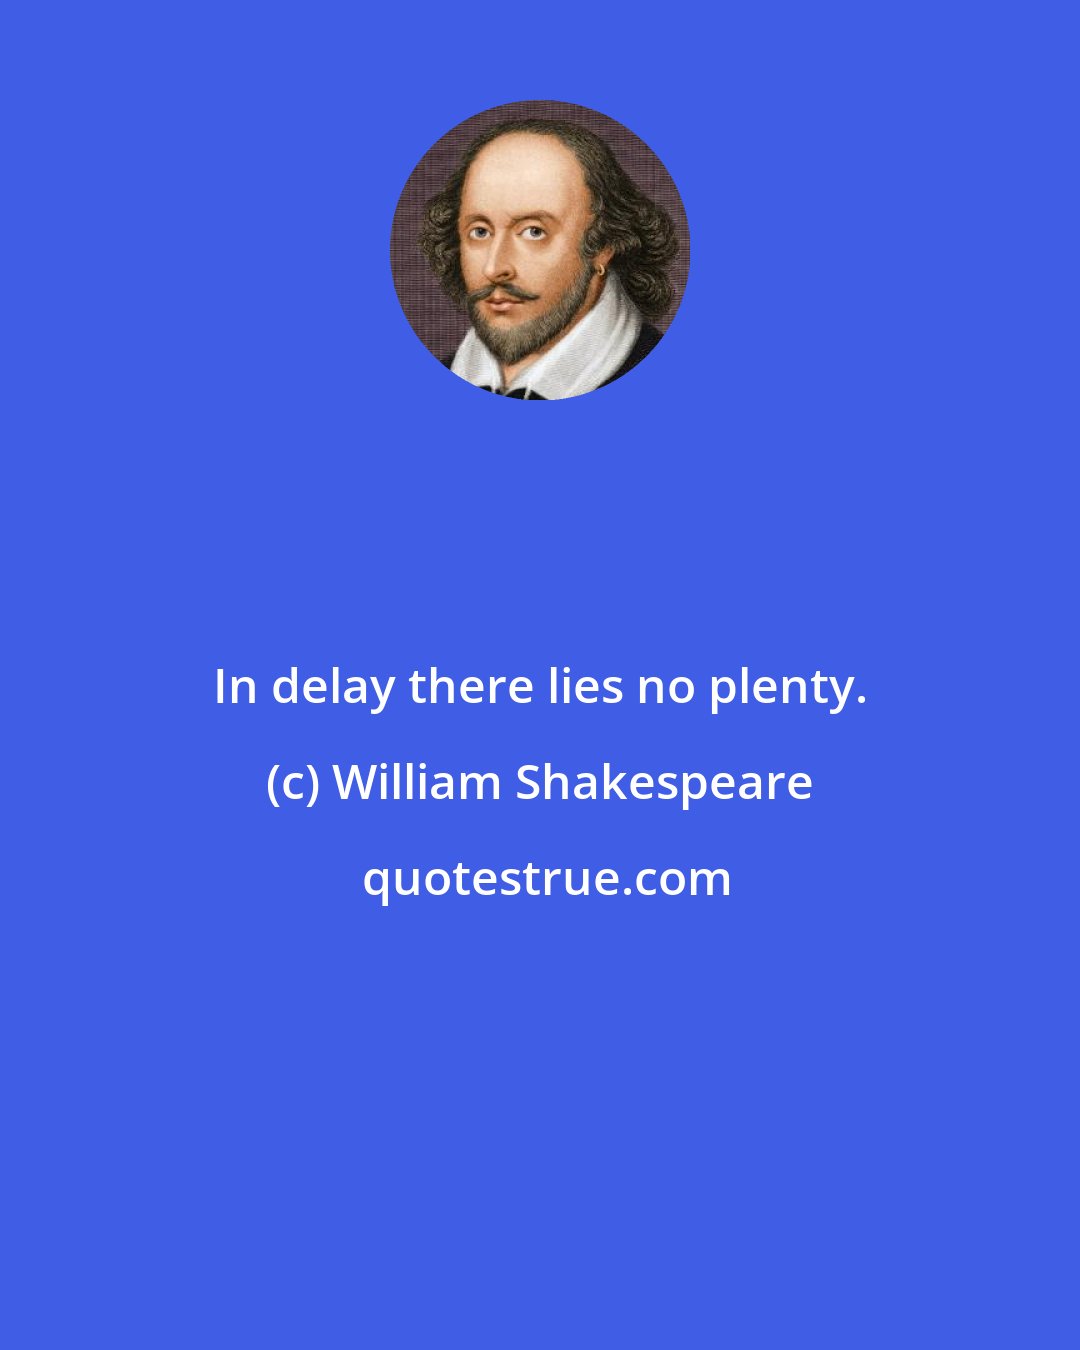 William Shakespeare: In delay there lies no plenty.